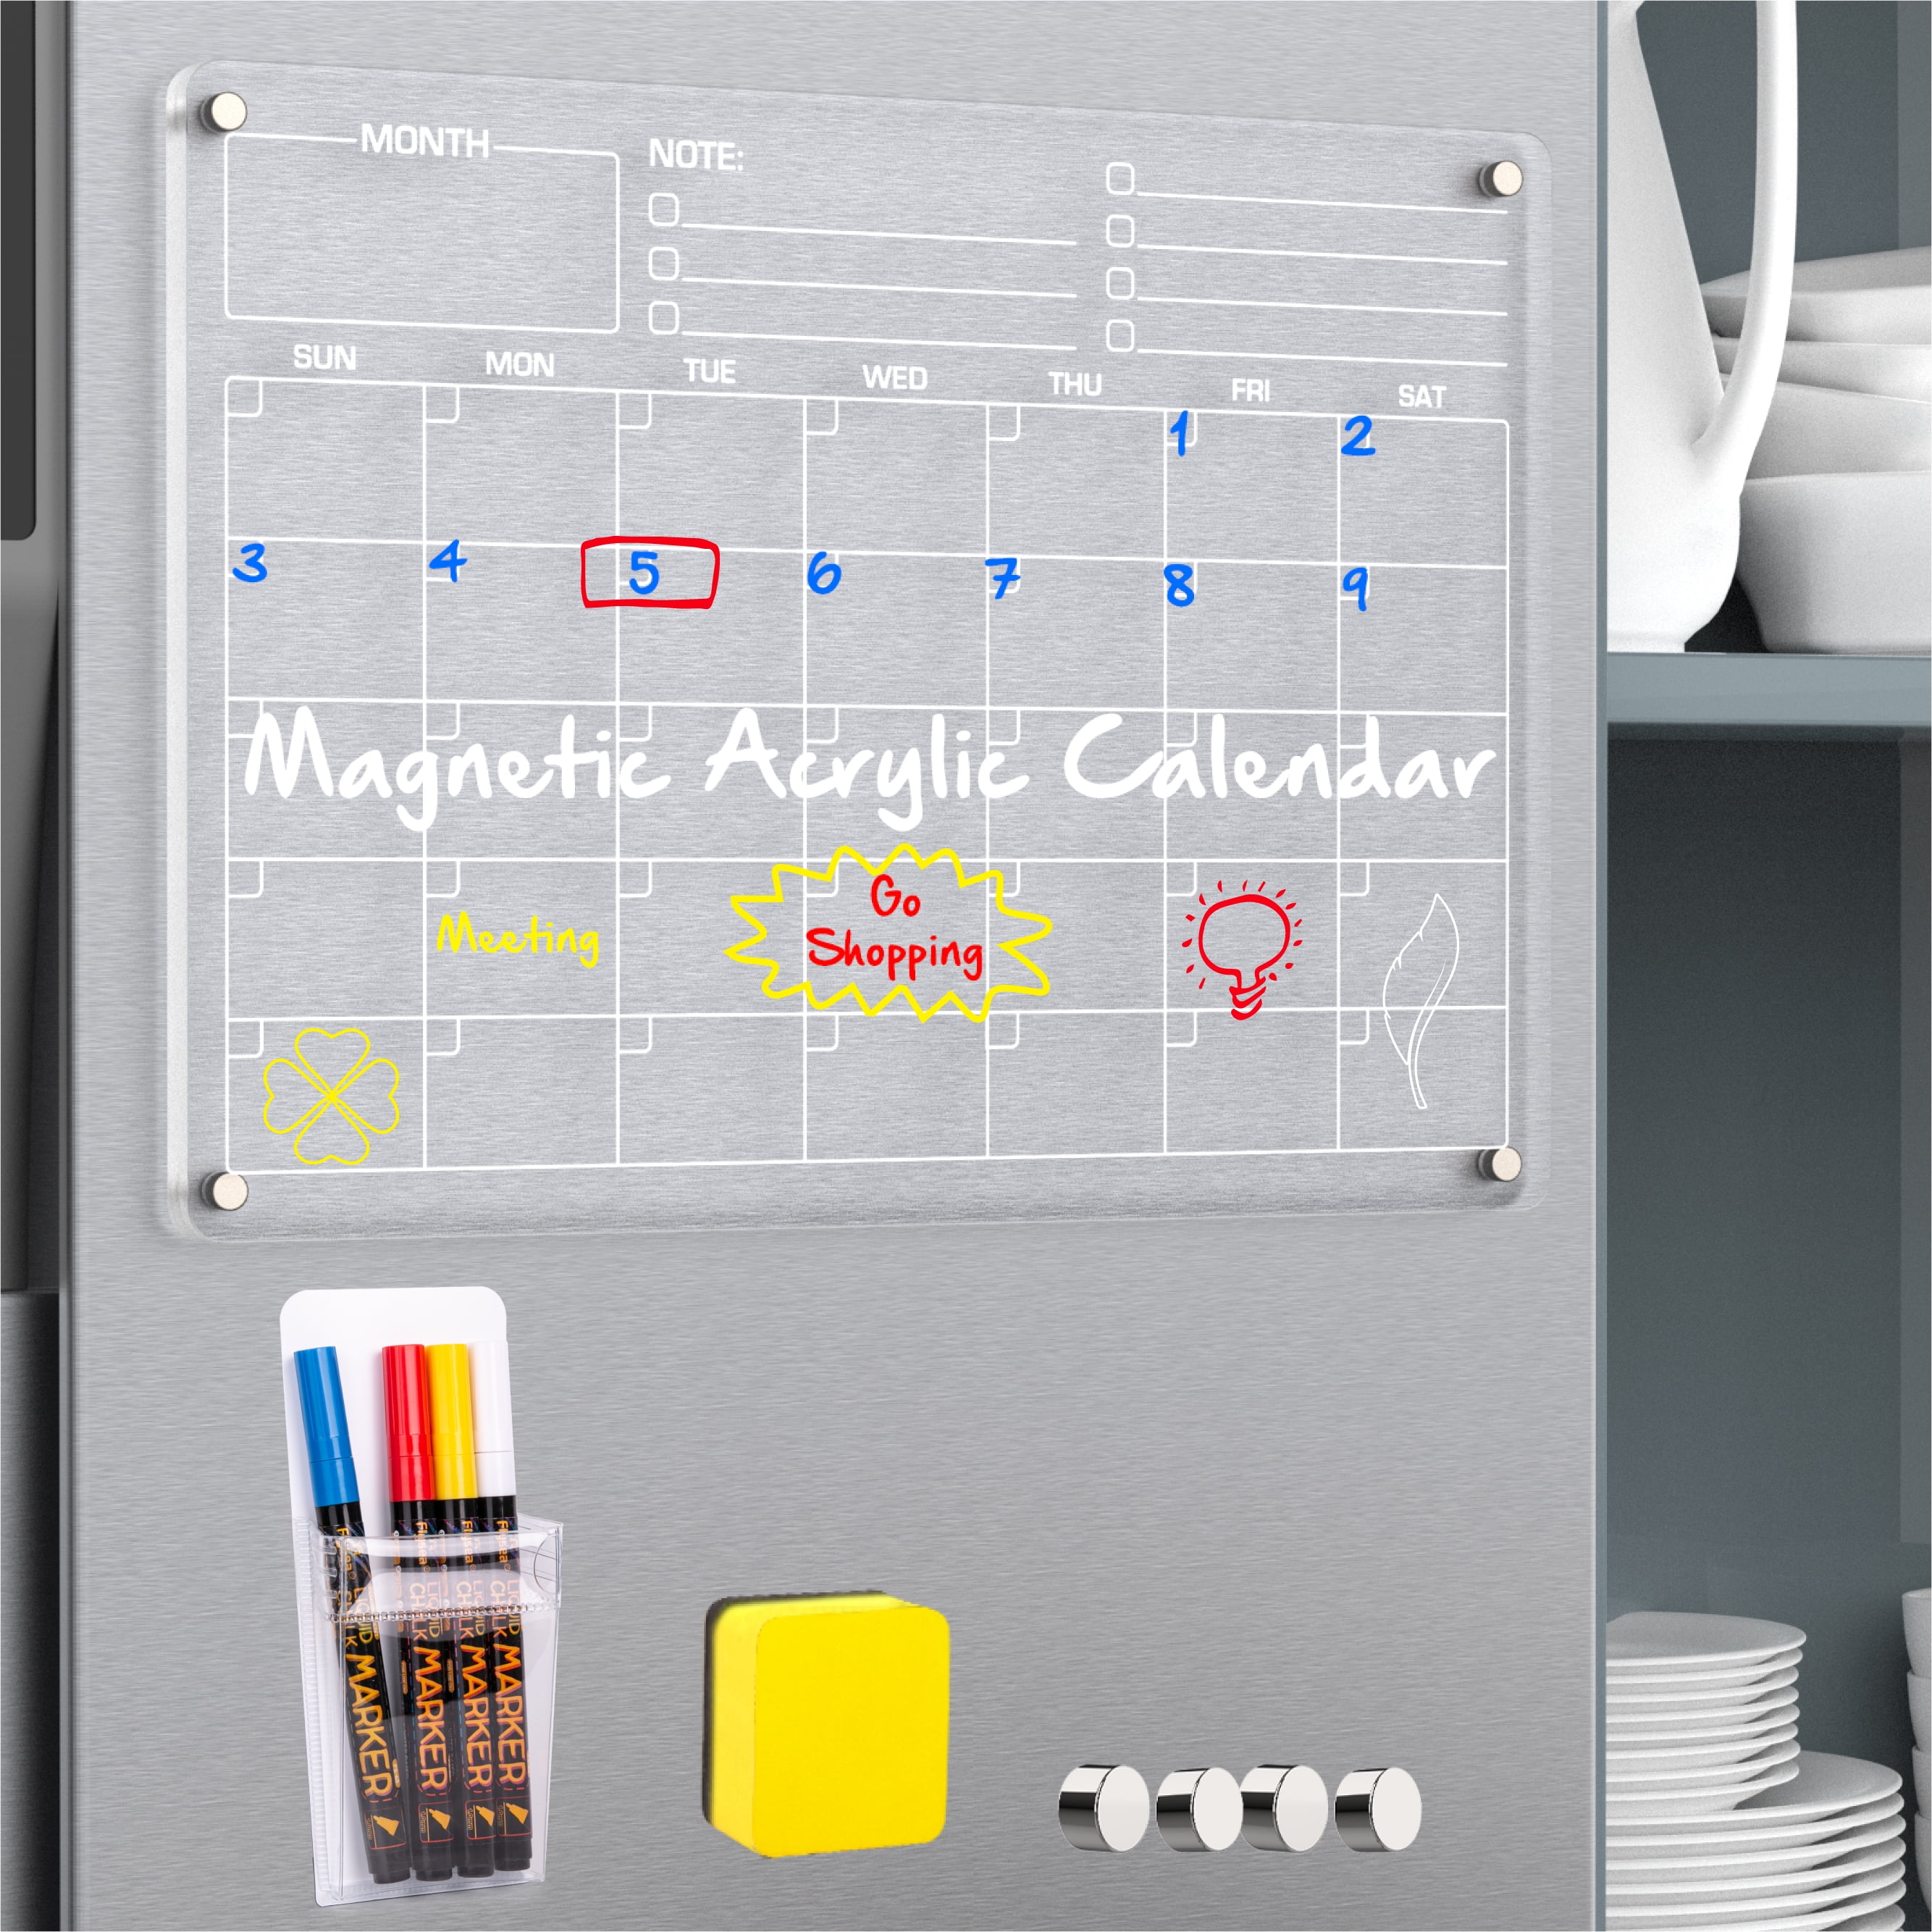  Magnetic Acrylic Calendar for Fridge, 16x12 Clear Fridge  Calendar Dry Erase Magnetic Planning Boards, Includes 8 Highlight Markers,  Magnetic Pen Holder, 2 Nail-Free Stickers and Erase Towel : Office Products